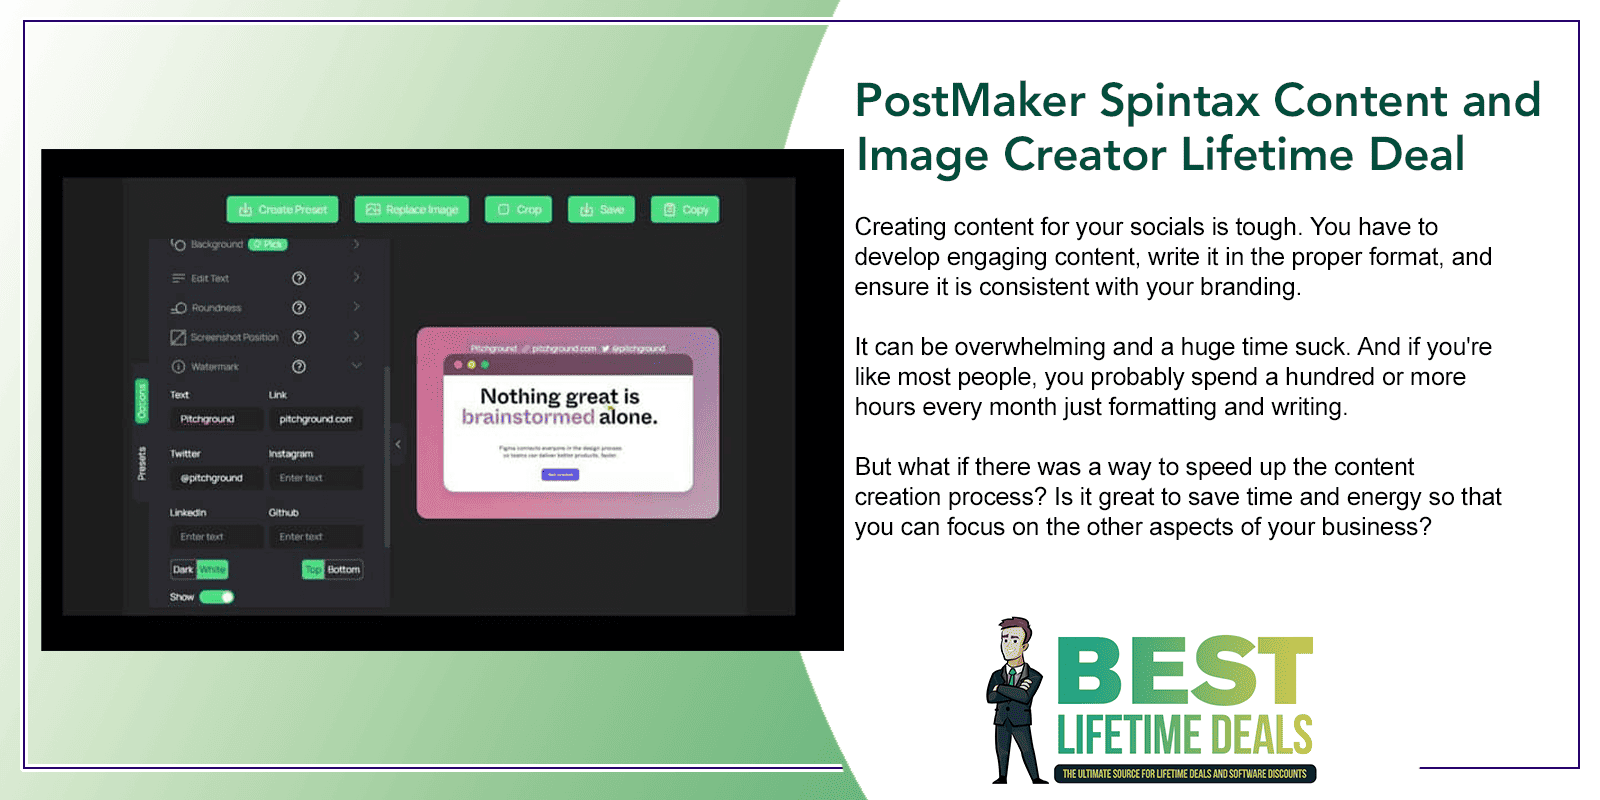 PostMaker Spintax Content and Image Creator Lifetime Deal